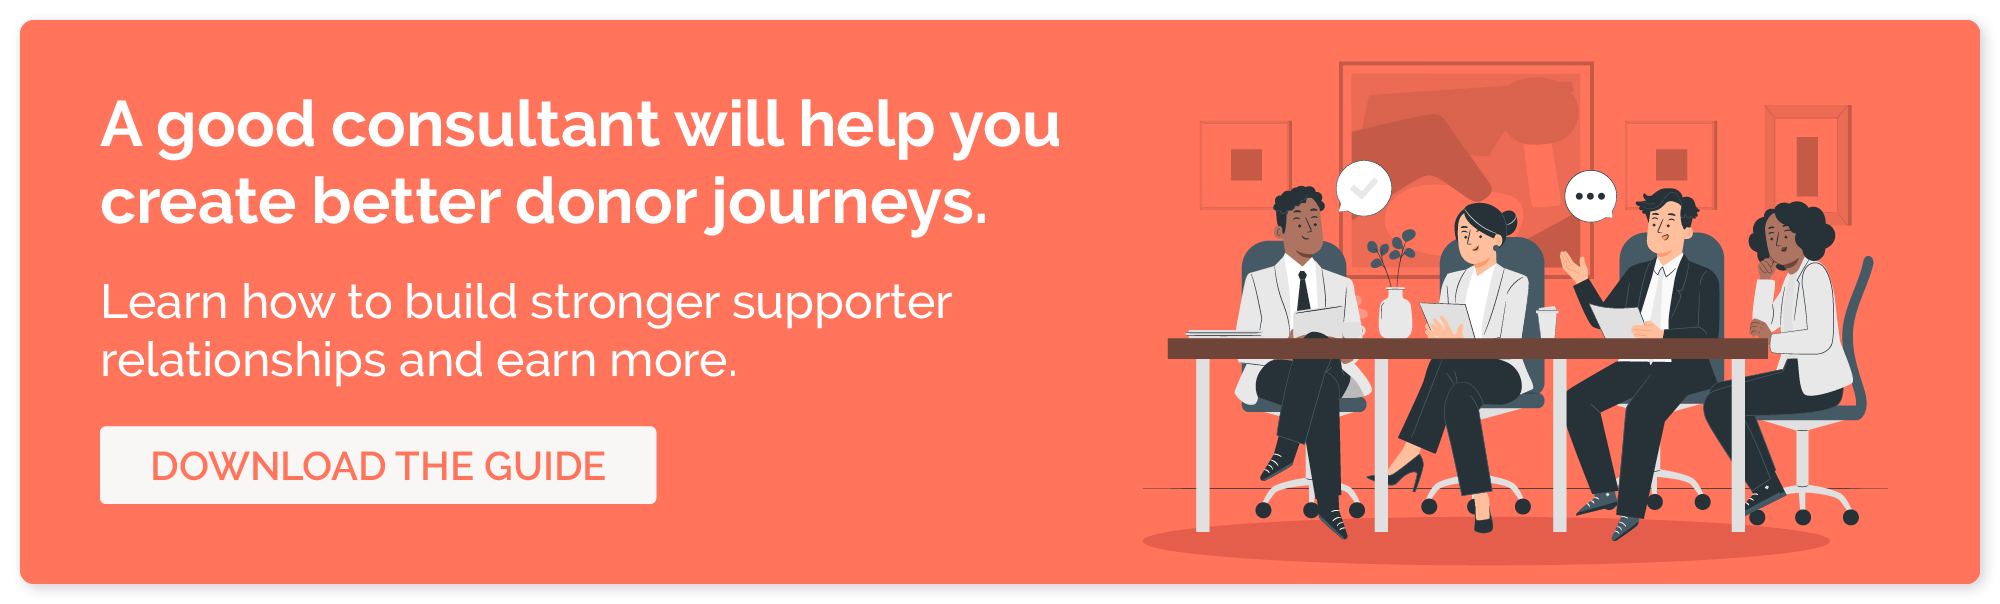 A good consultant will help you create better donor journeys. Learn how to build stronger supporter relationships and earn more.